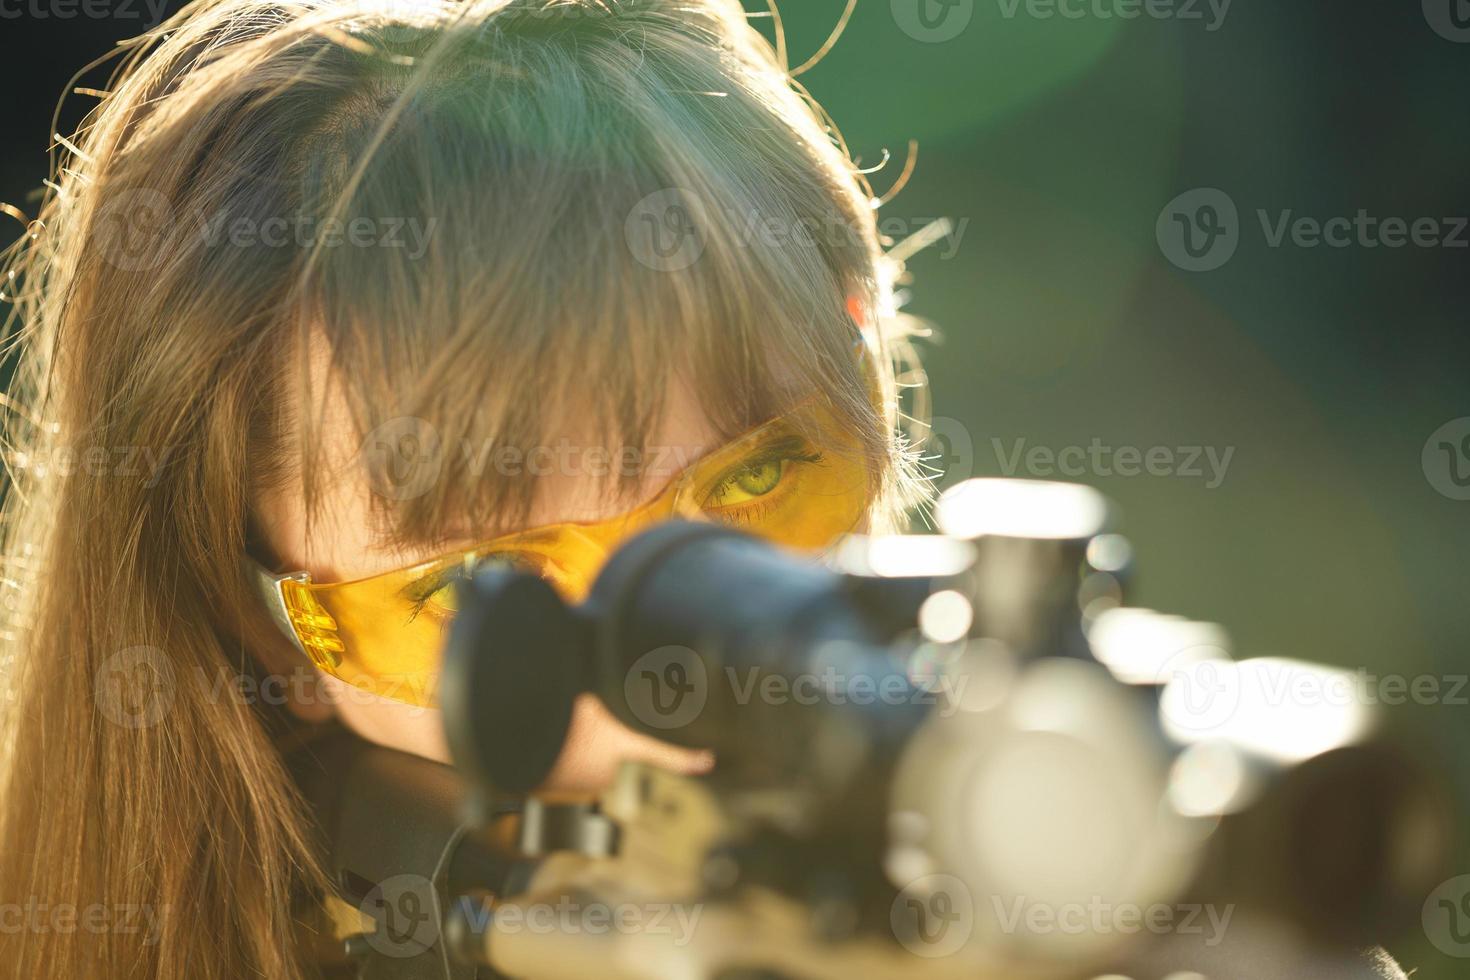 Girl with a gun for trap shooting and shooting glasses aiming at a target photo